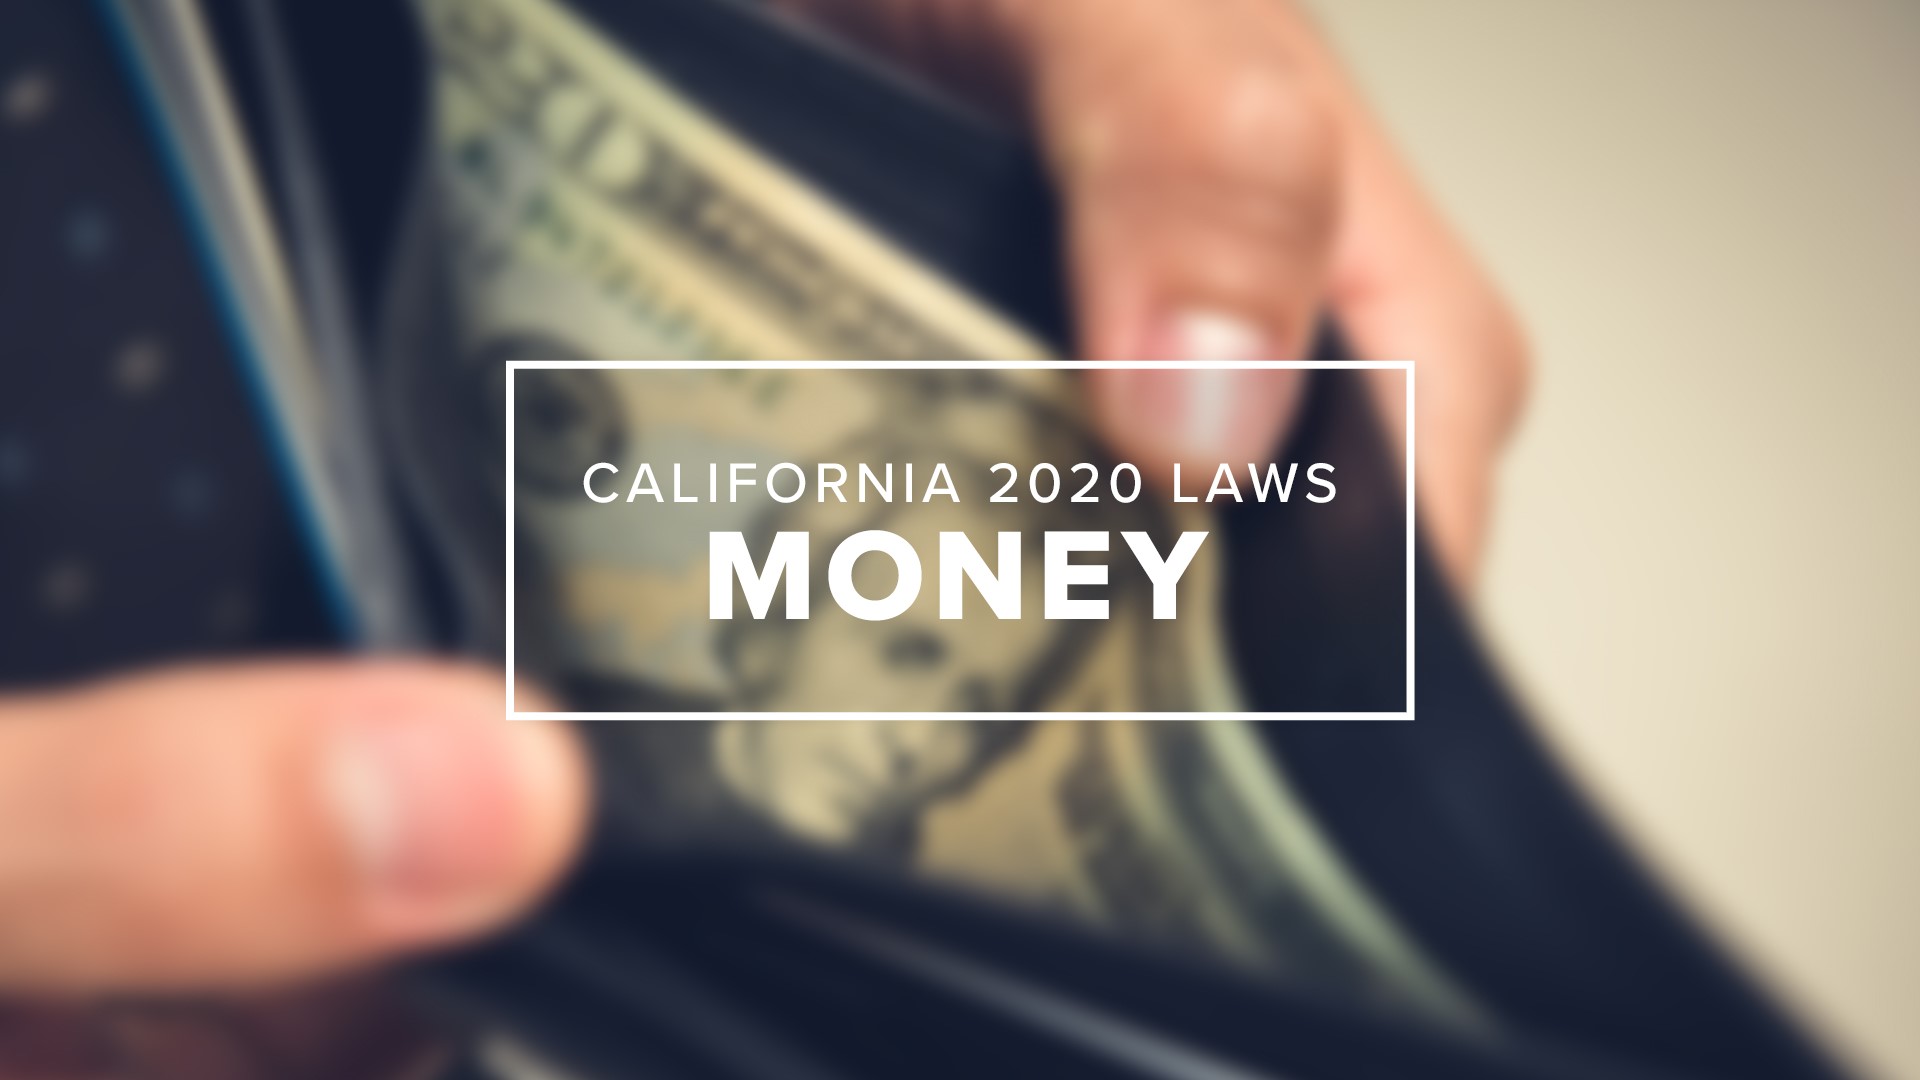 California's new money laws explained